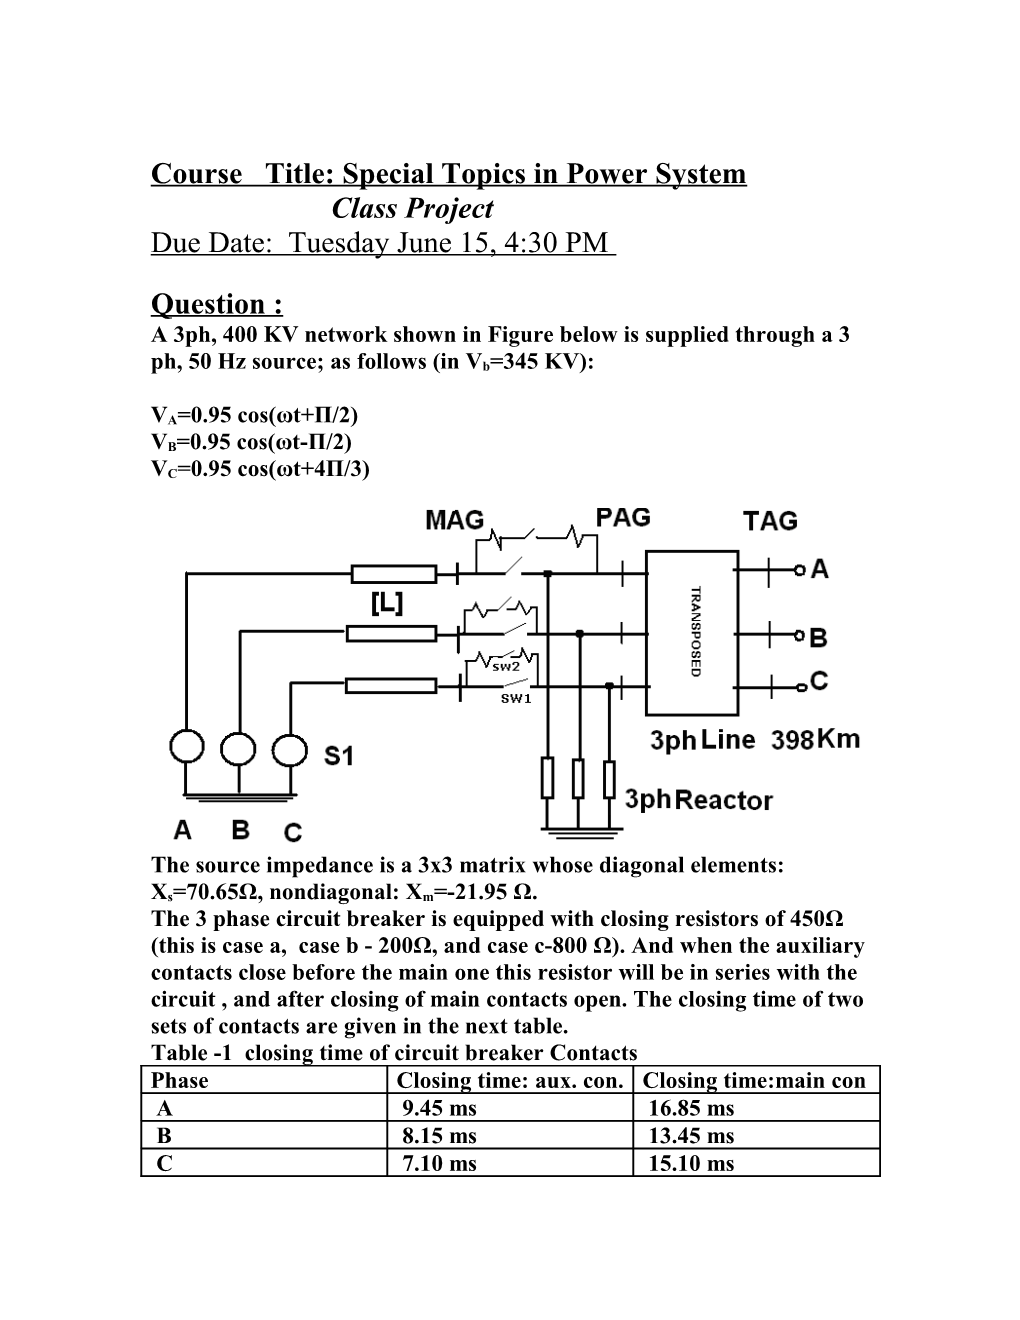 Course Title : Special Topics in Power System,ELEC9225